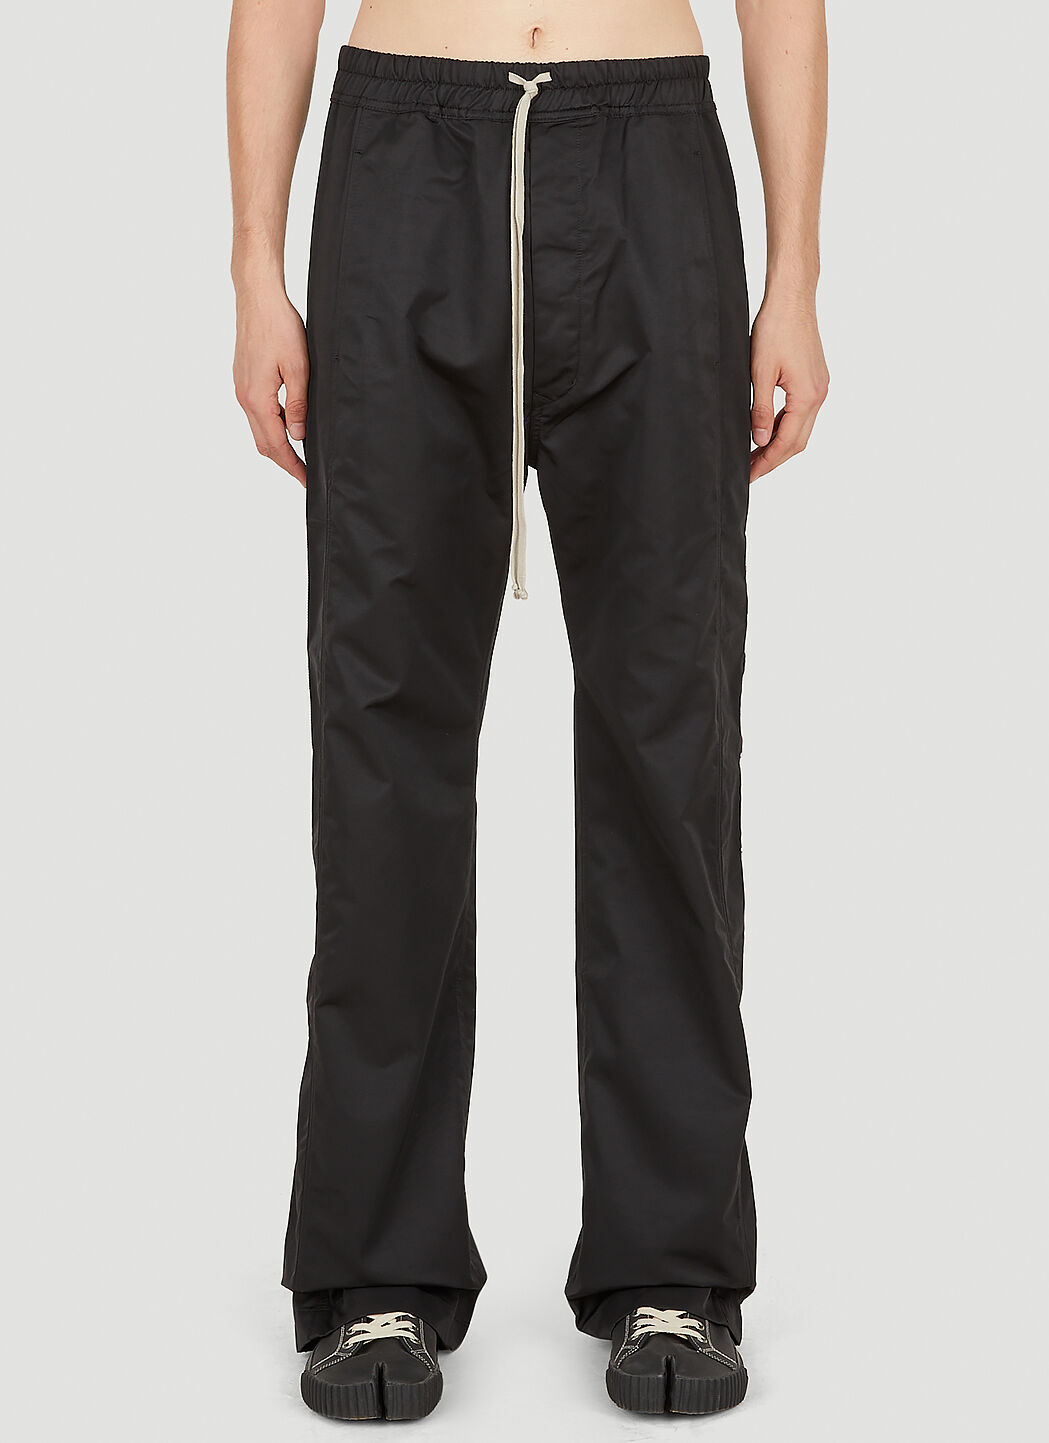 2023AW Rick owens DRKSHDW pusher pants 【保証書付】 - パンツ